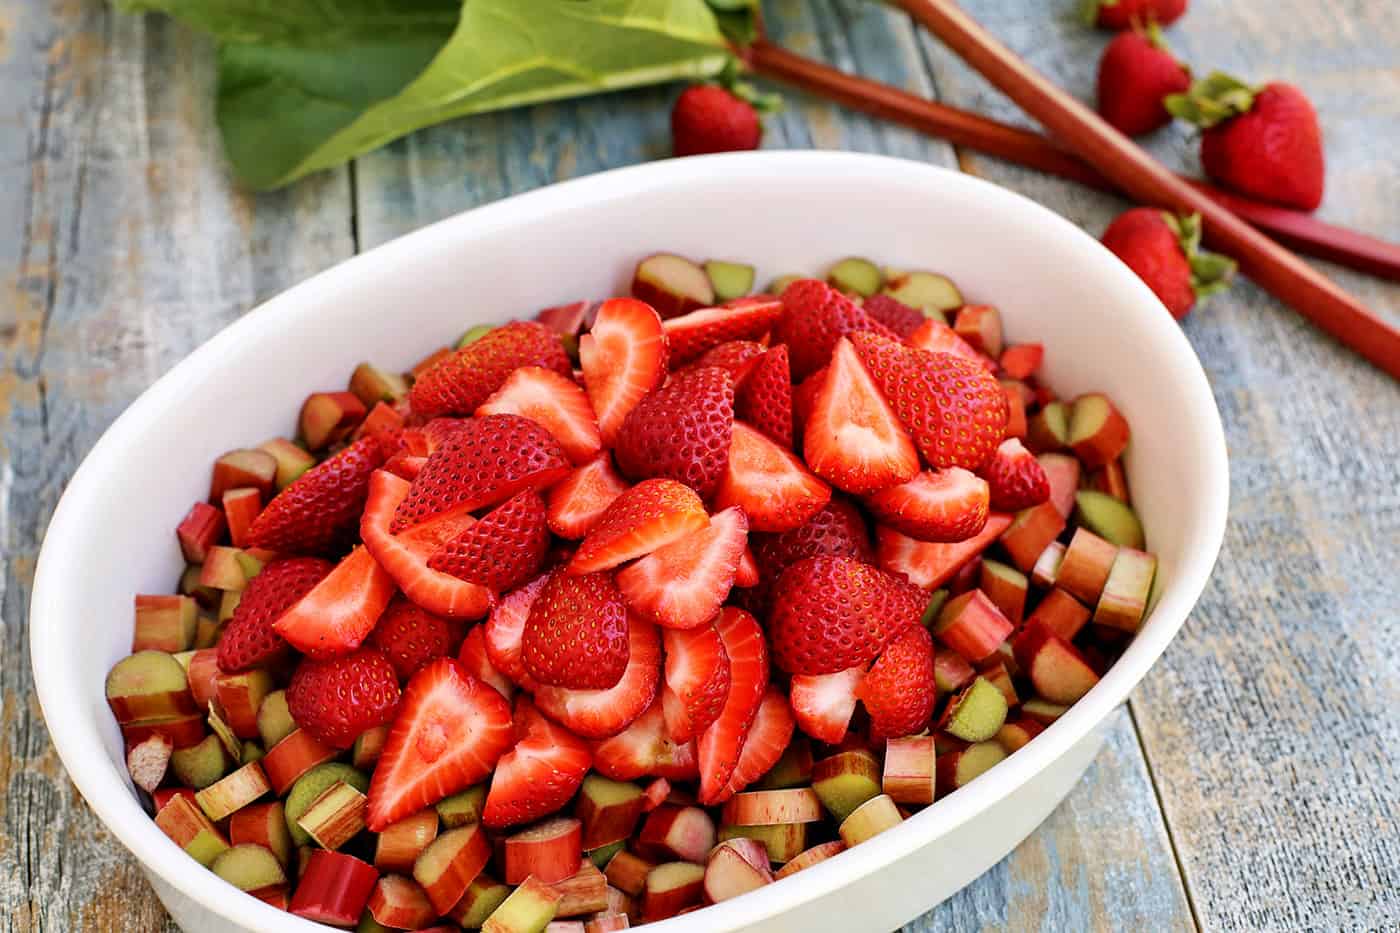 Chopped strawberries and rhubarb in an oval baking dish